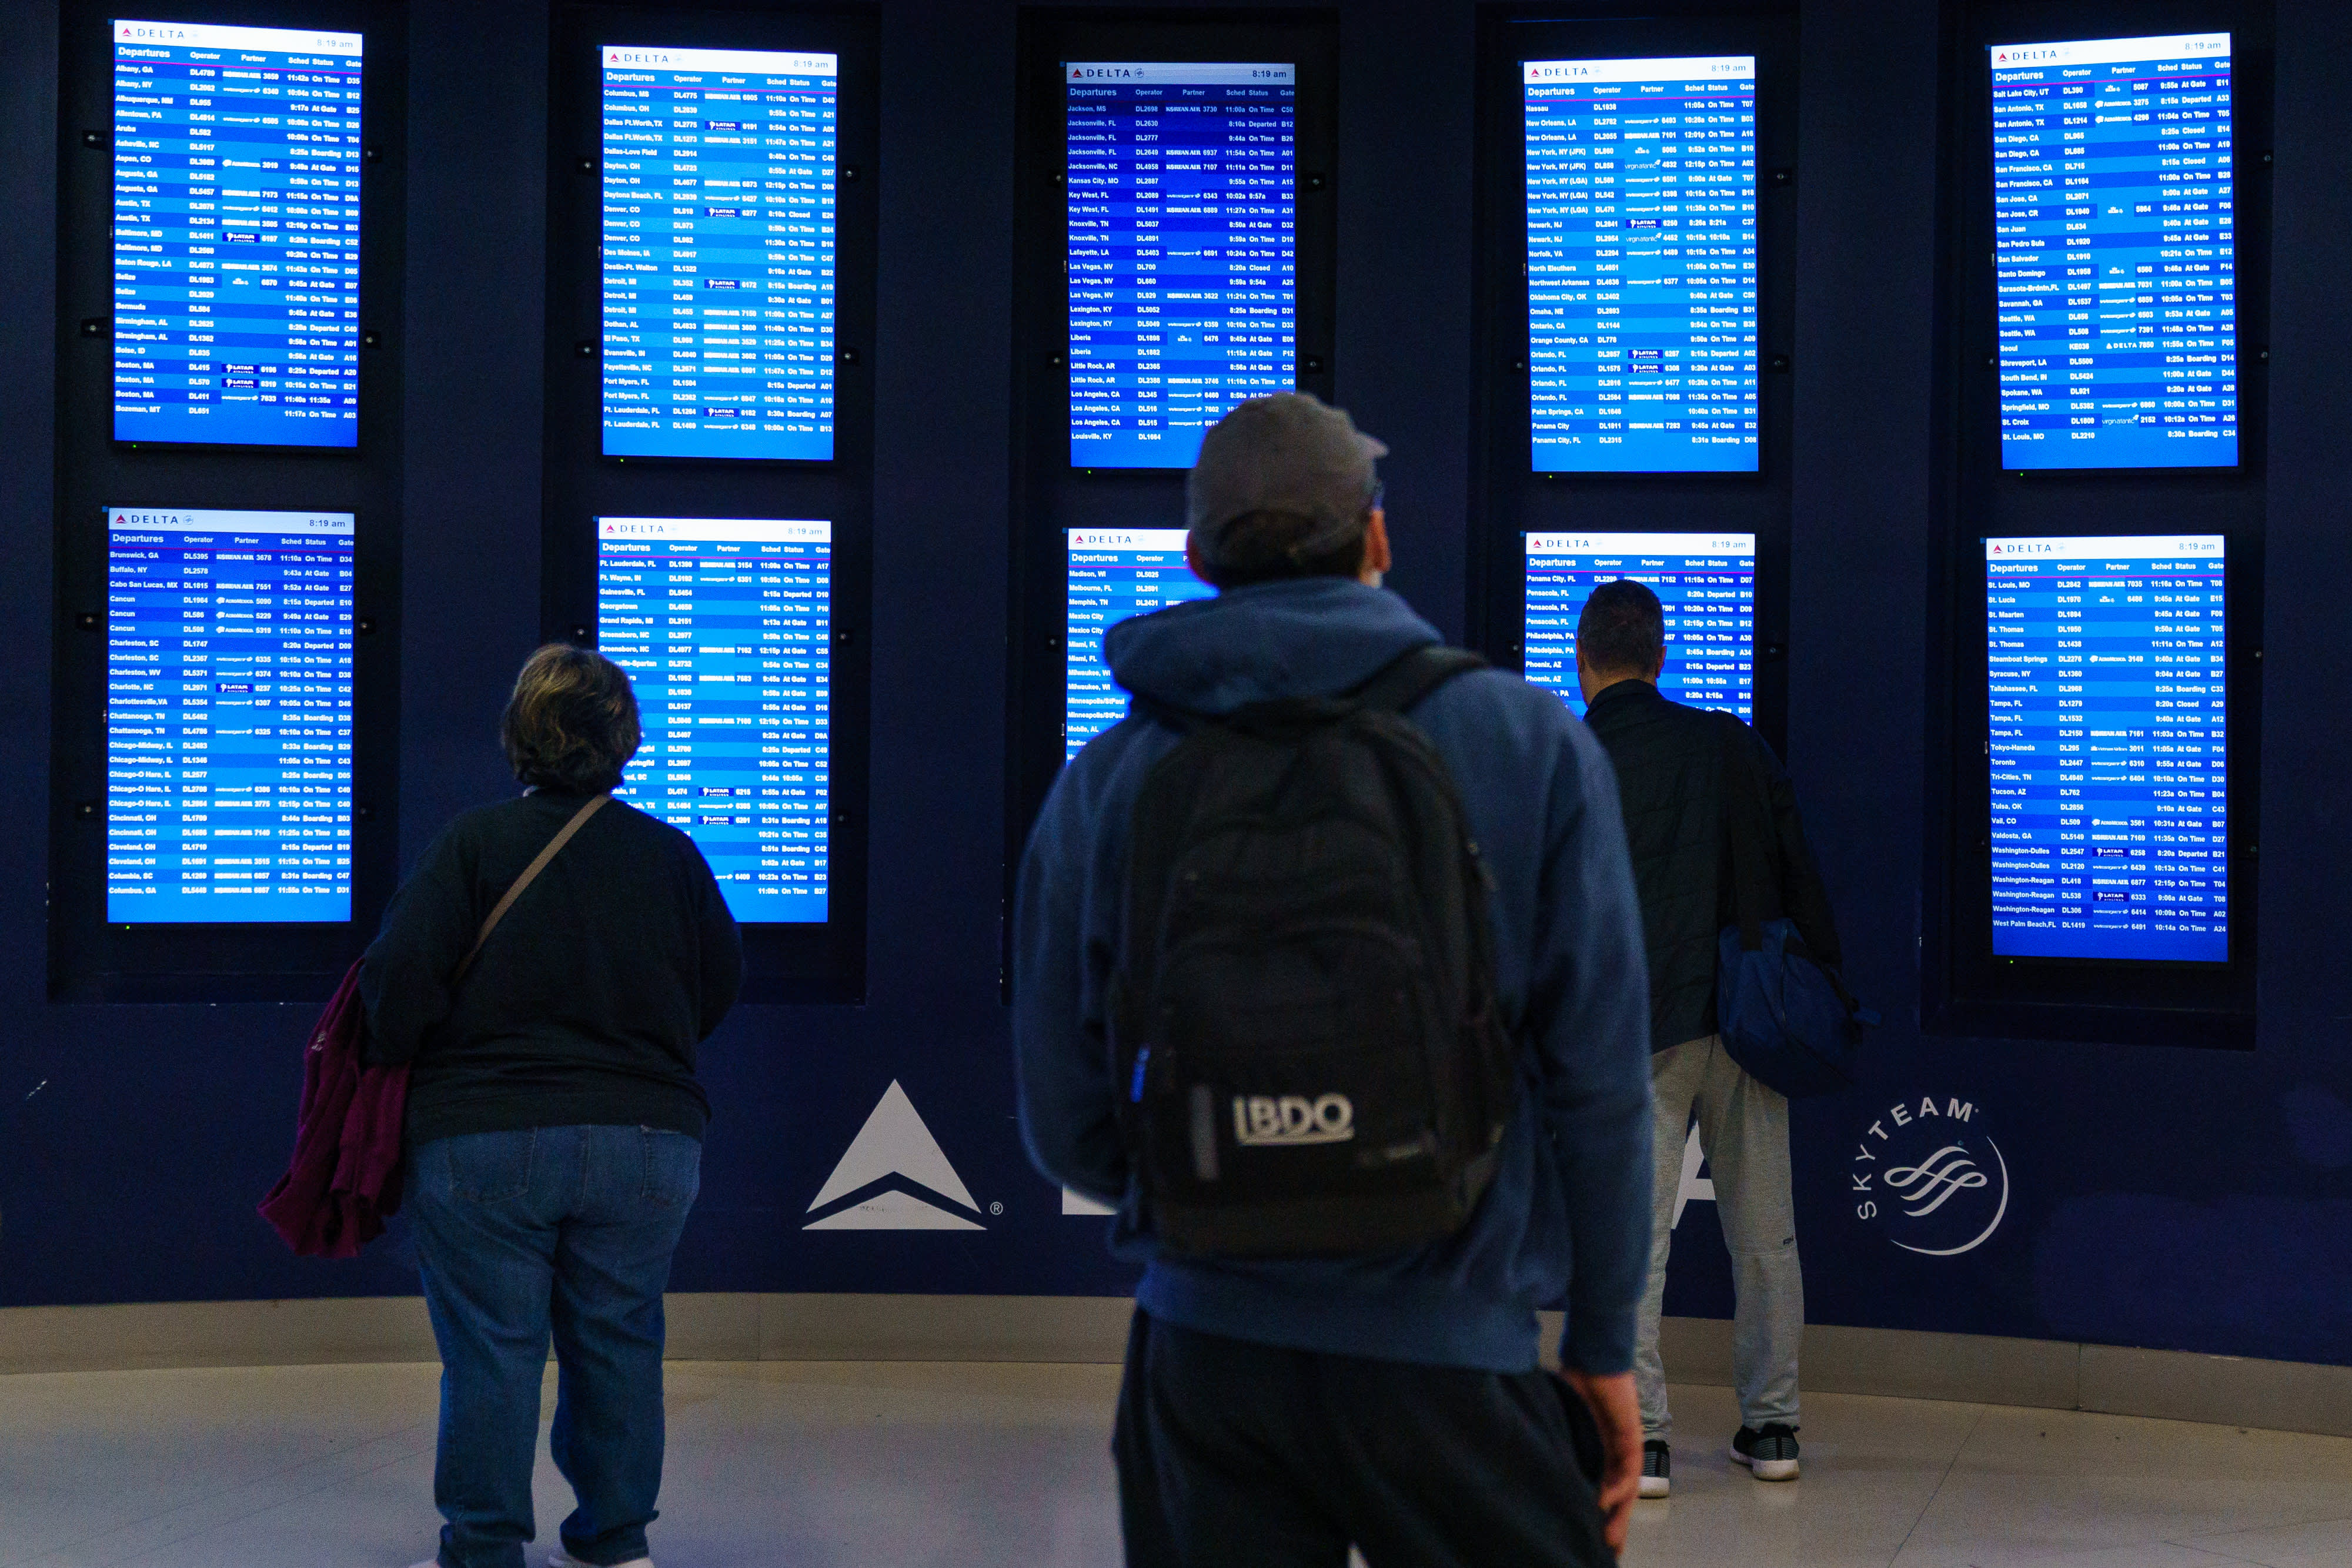 Rocky start to 2022 air travel as bad weather, omicron drive thousands of cancellations